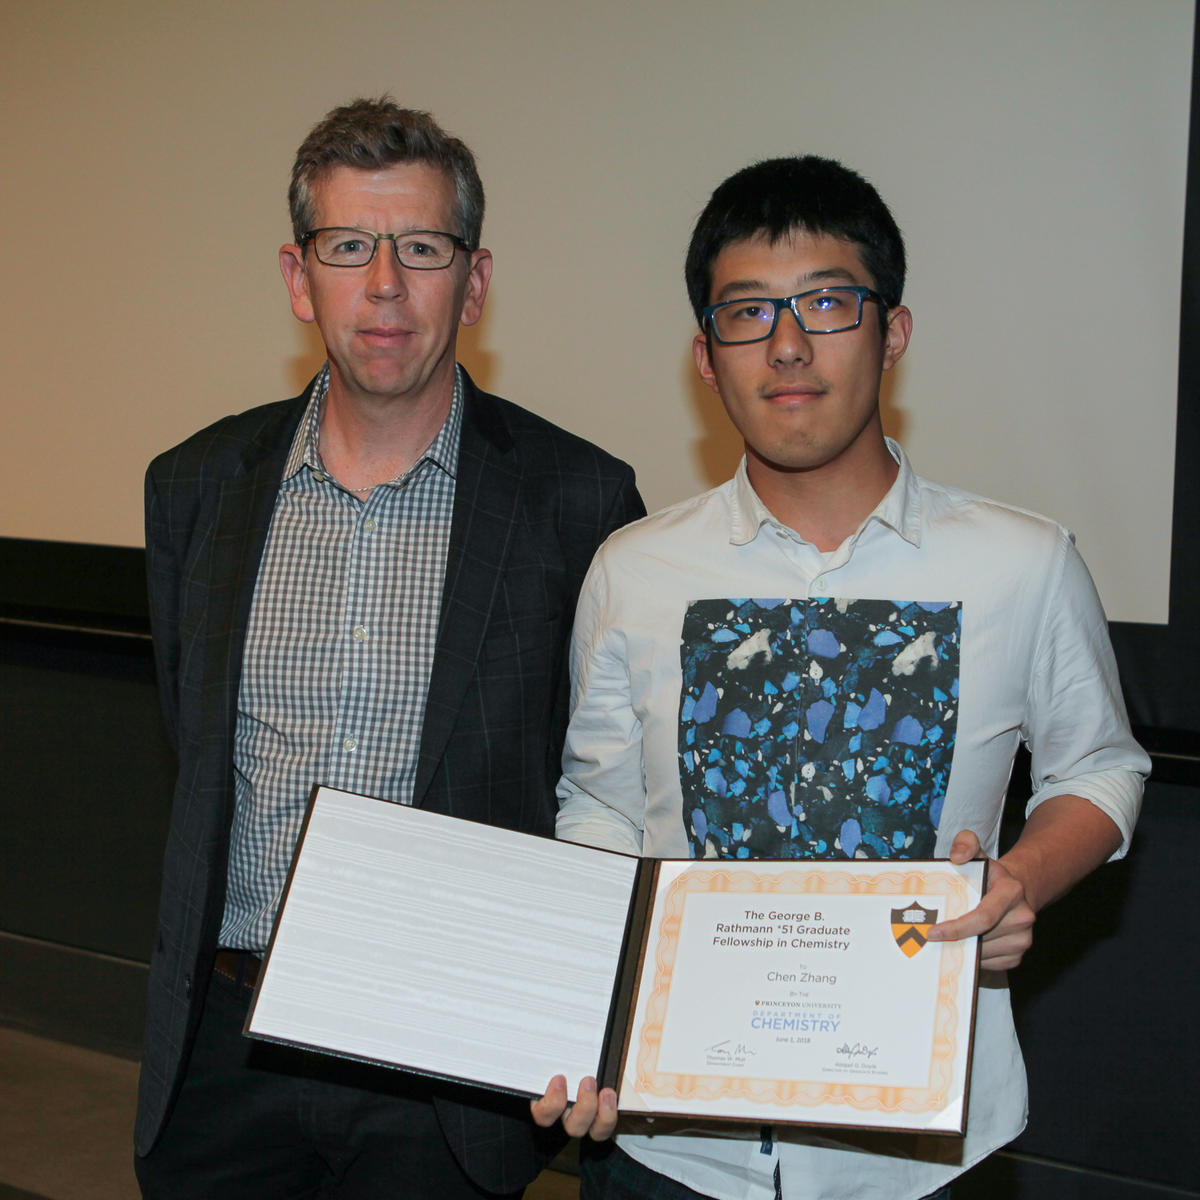 Tom Muir and Chen Zhang (Seyedsayamdost lab), recipient of The George B. Rathmann *51 Graduate Fellowship in Chemistry